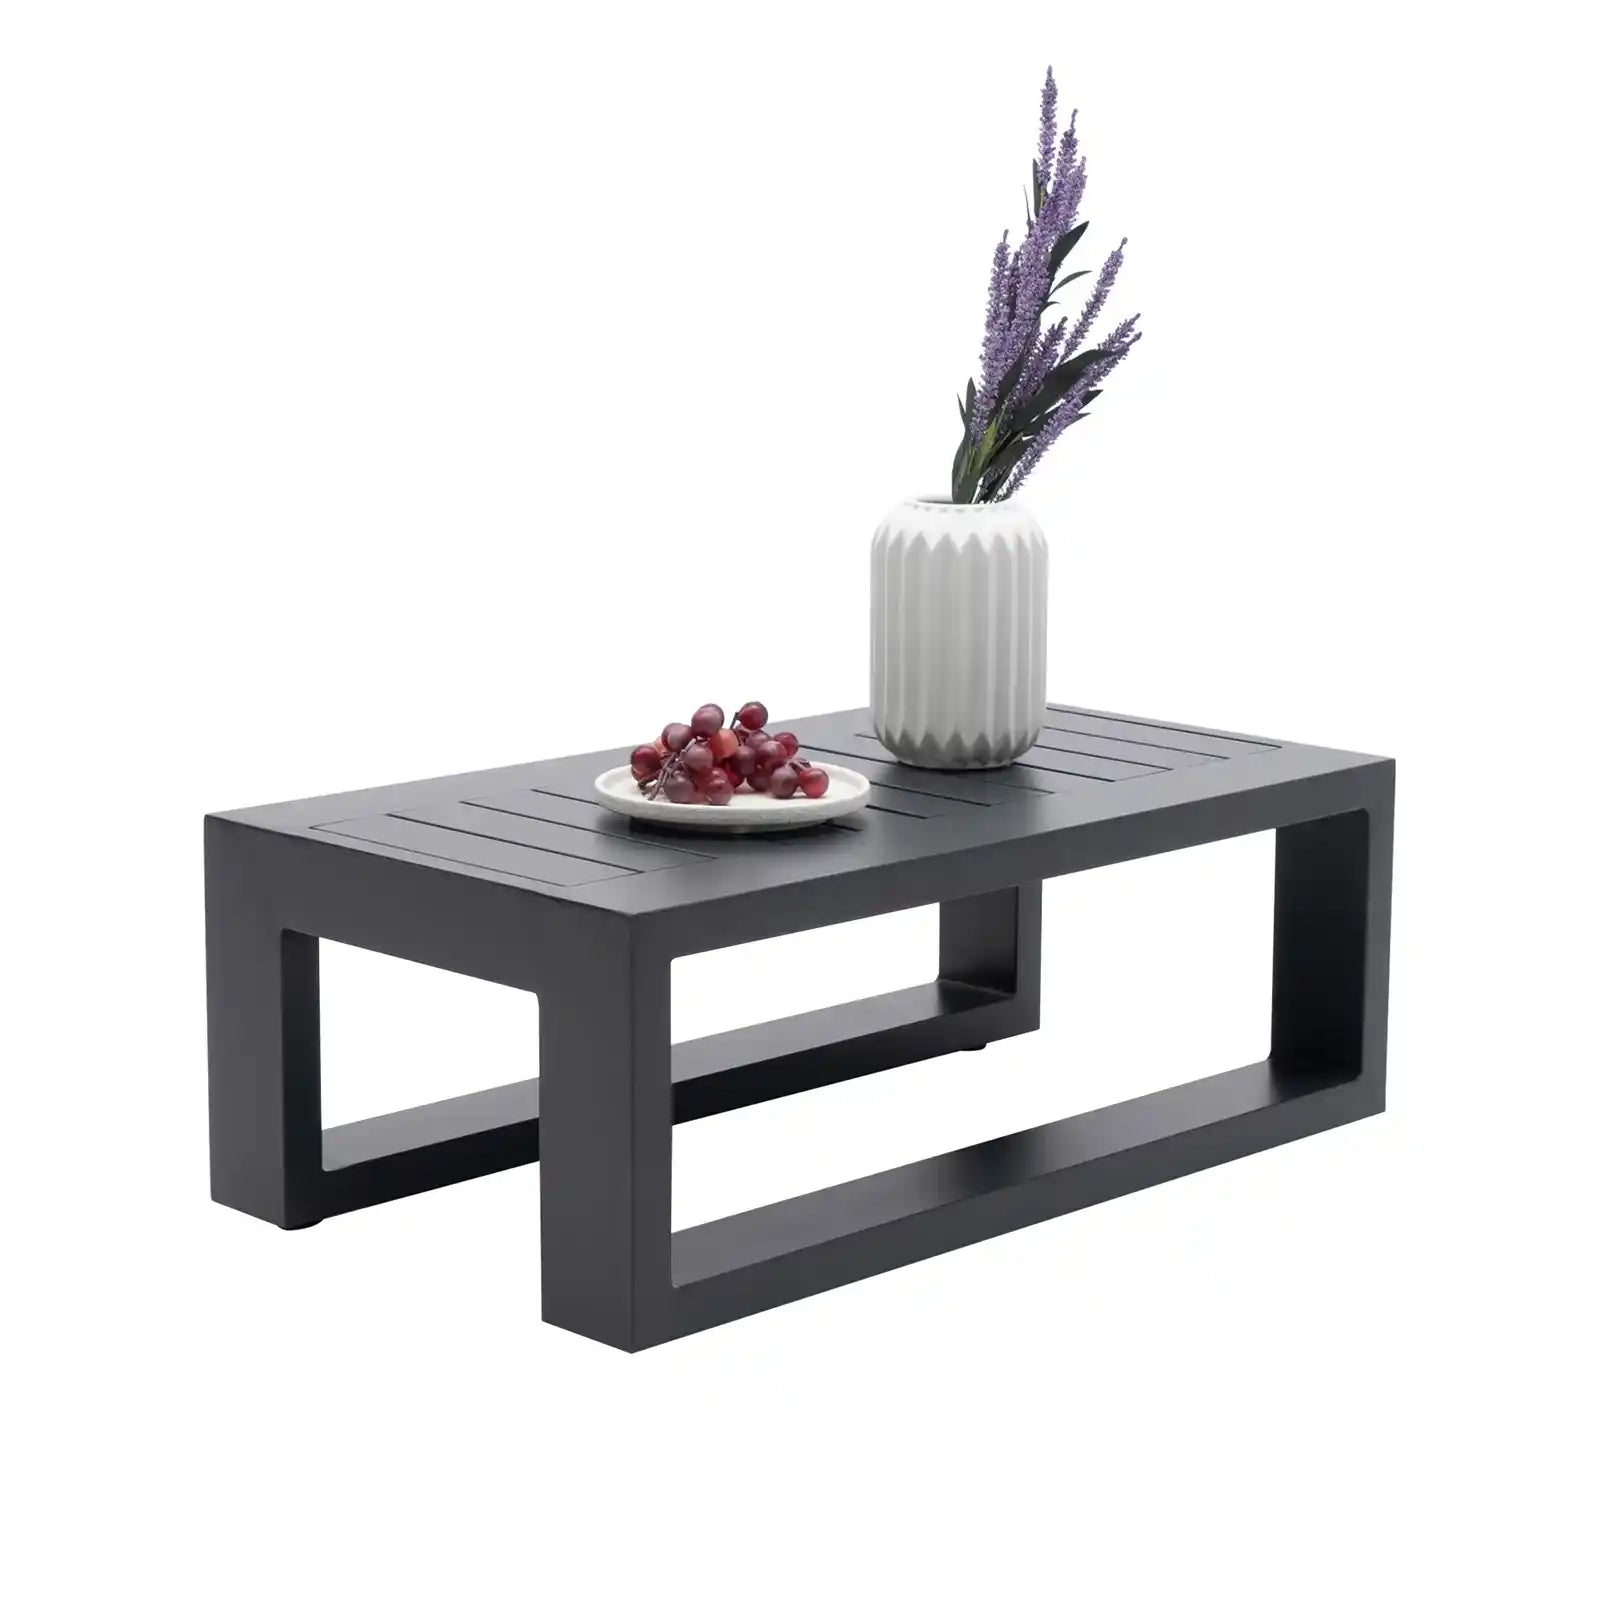 Patio Side Table Aluminum Outdoor End Tables Small Rectangle Coffee Table Patio Furniture,Gray